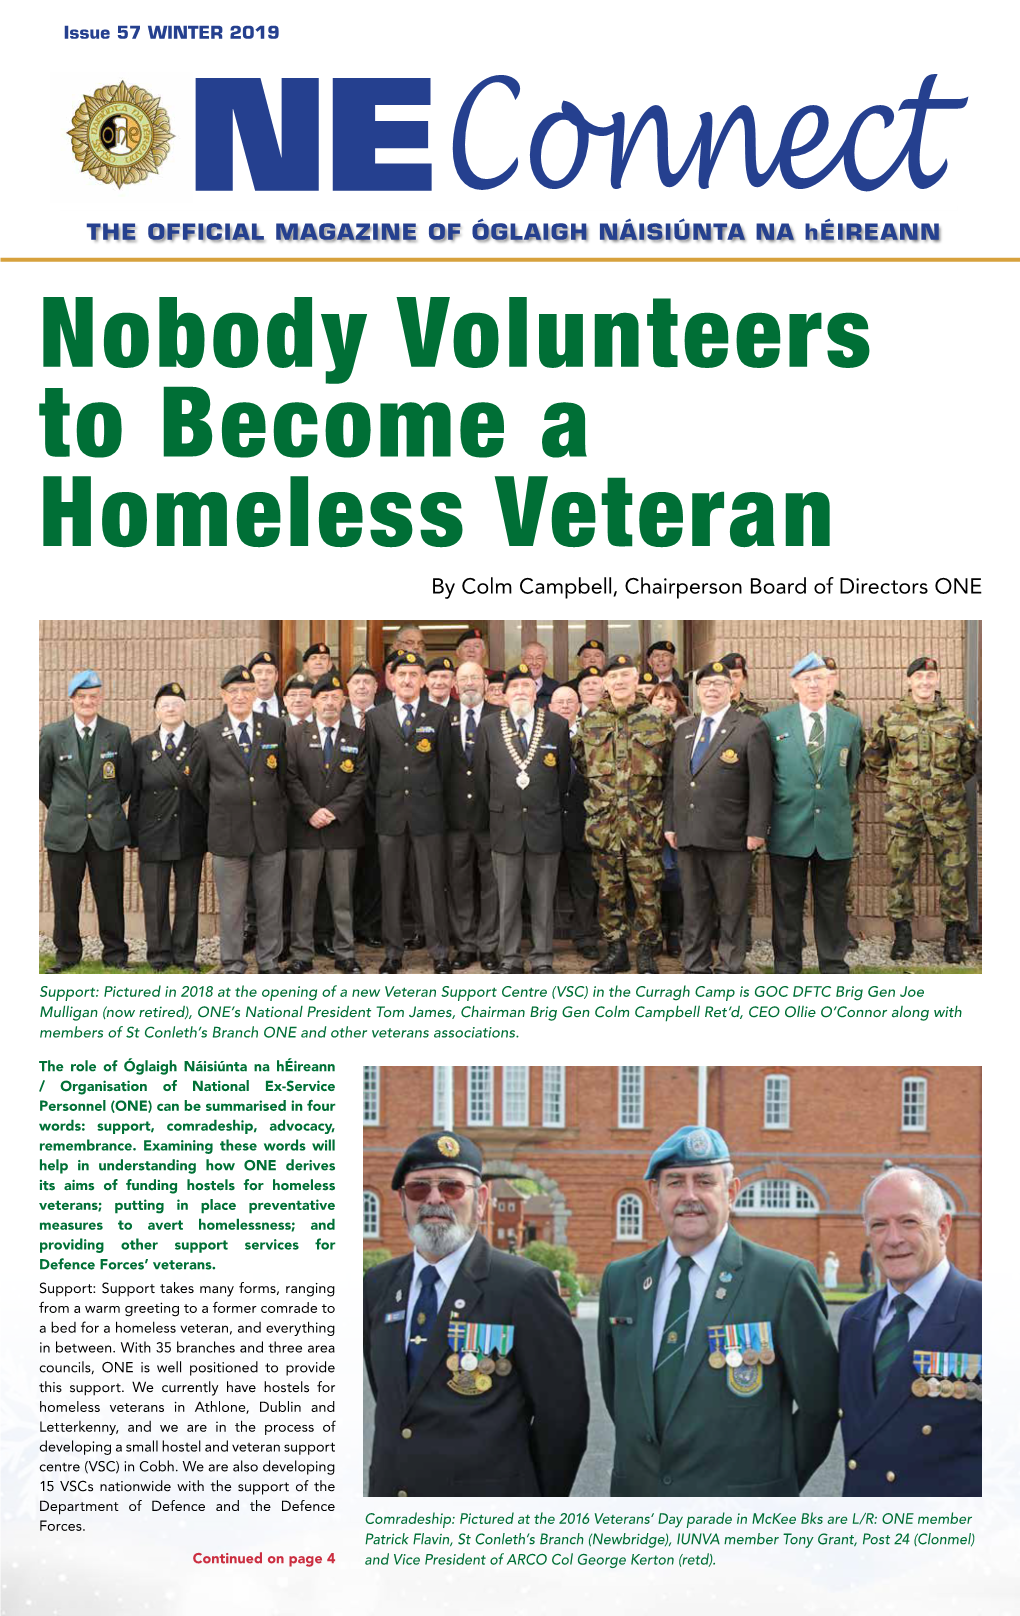 THE OFFICIAL MAGAZINE of ÓGLAIGH NÁISIÚNTA NA Héireann Nobody Volunteers to Become a Homeless Veteran by Colm Campbell, Chairperson Board of Directors ONE